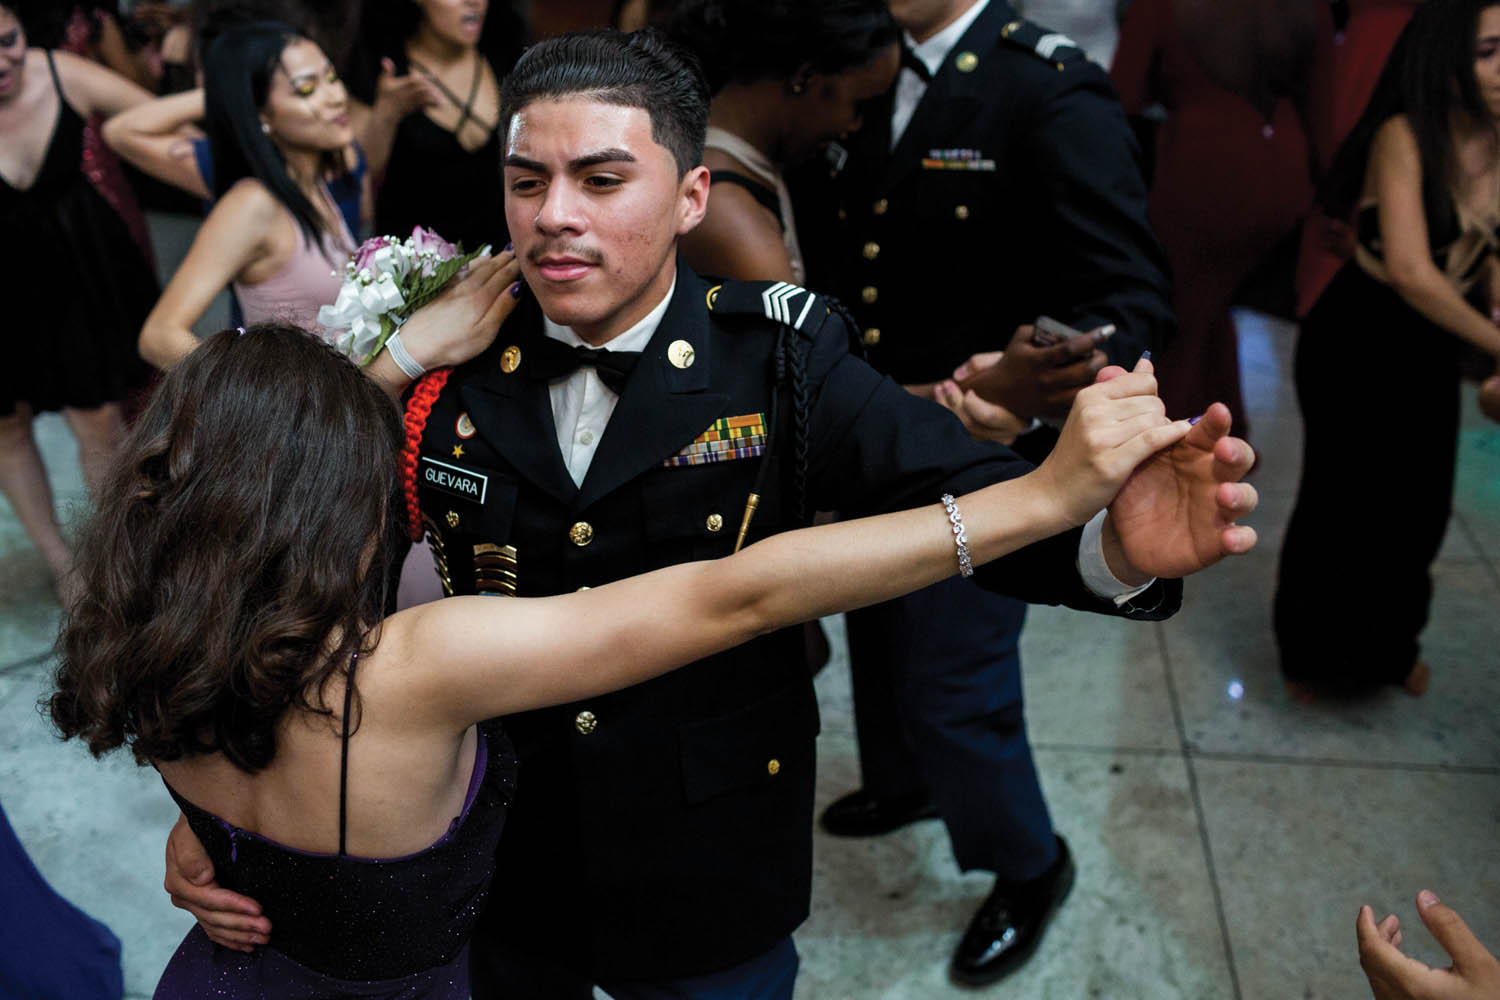 Students from Theodore Roosevelt Educational Campus celebrate the grand finale of its seventh annual JROTC Military Ball at the Villa Baron Mansion (Bronx, NY). Photographed by Sarah Blesener